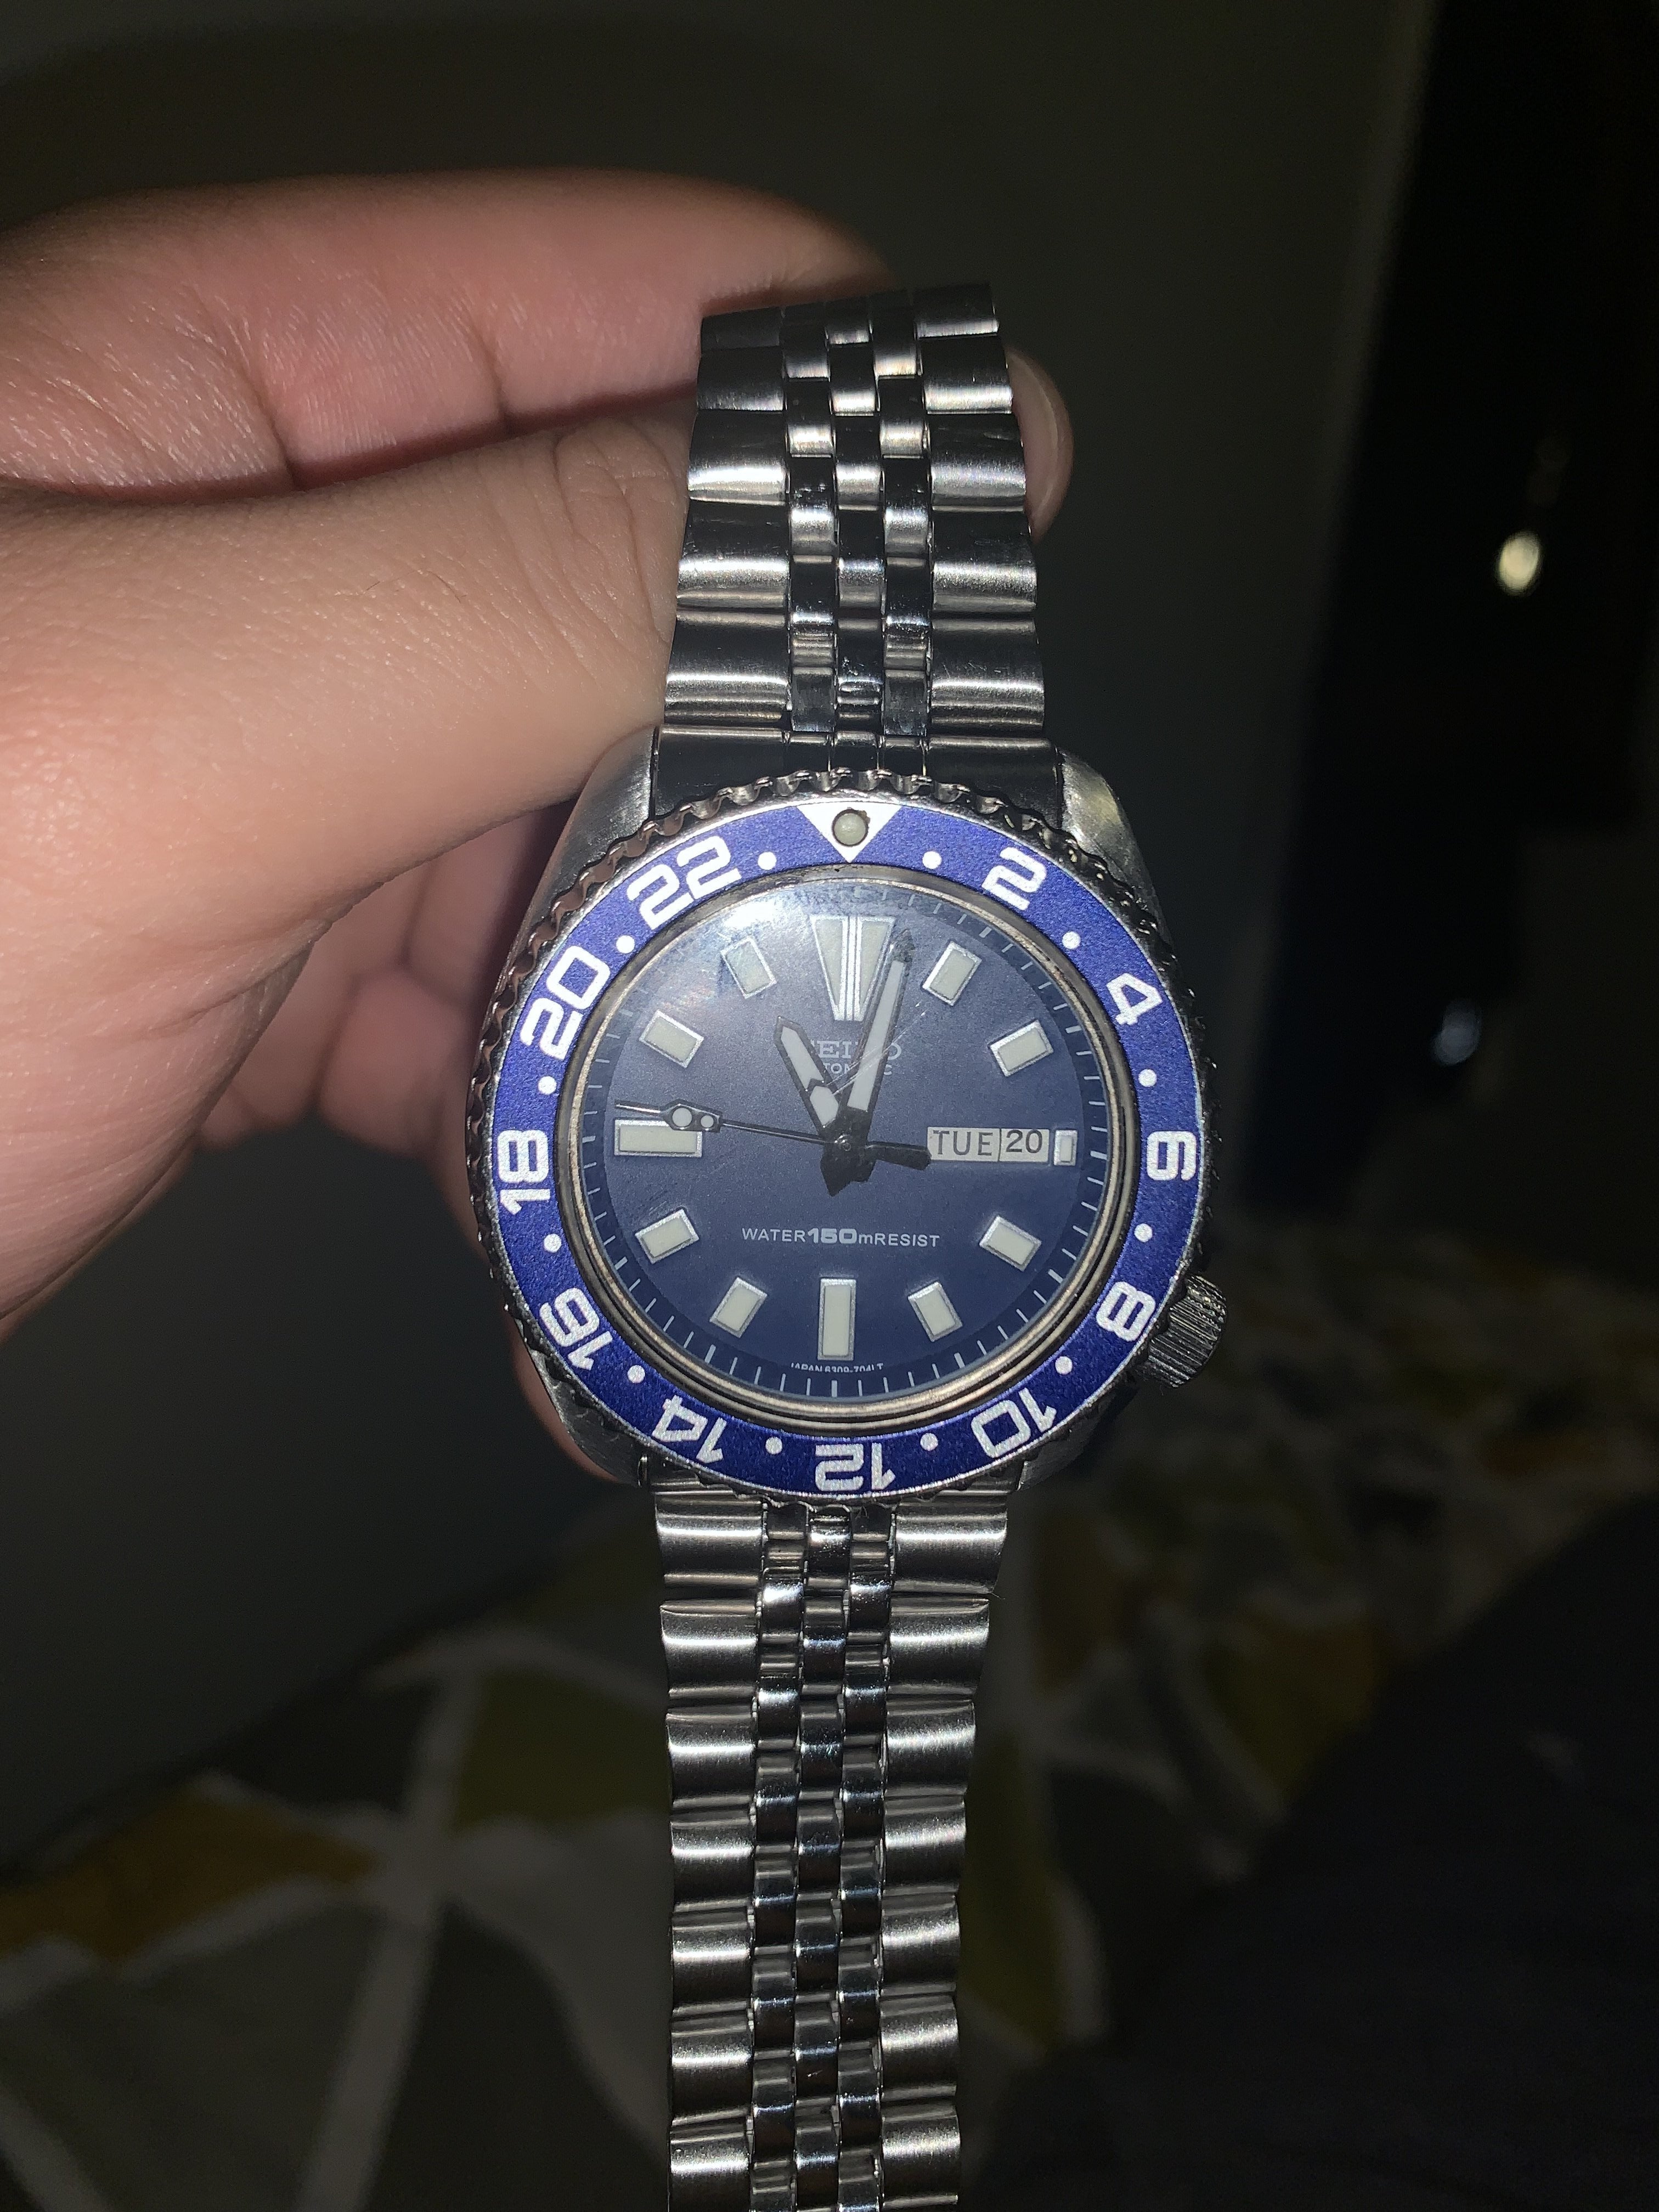 Seiko watch real or fake? Pls help | The Watch Site